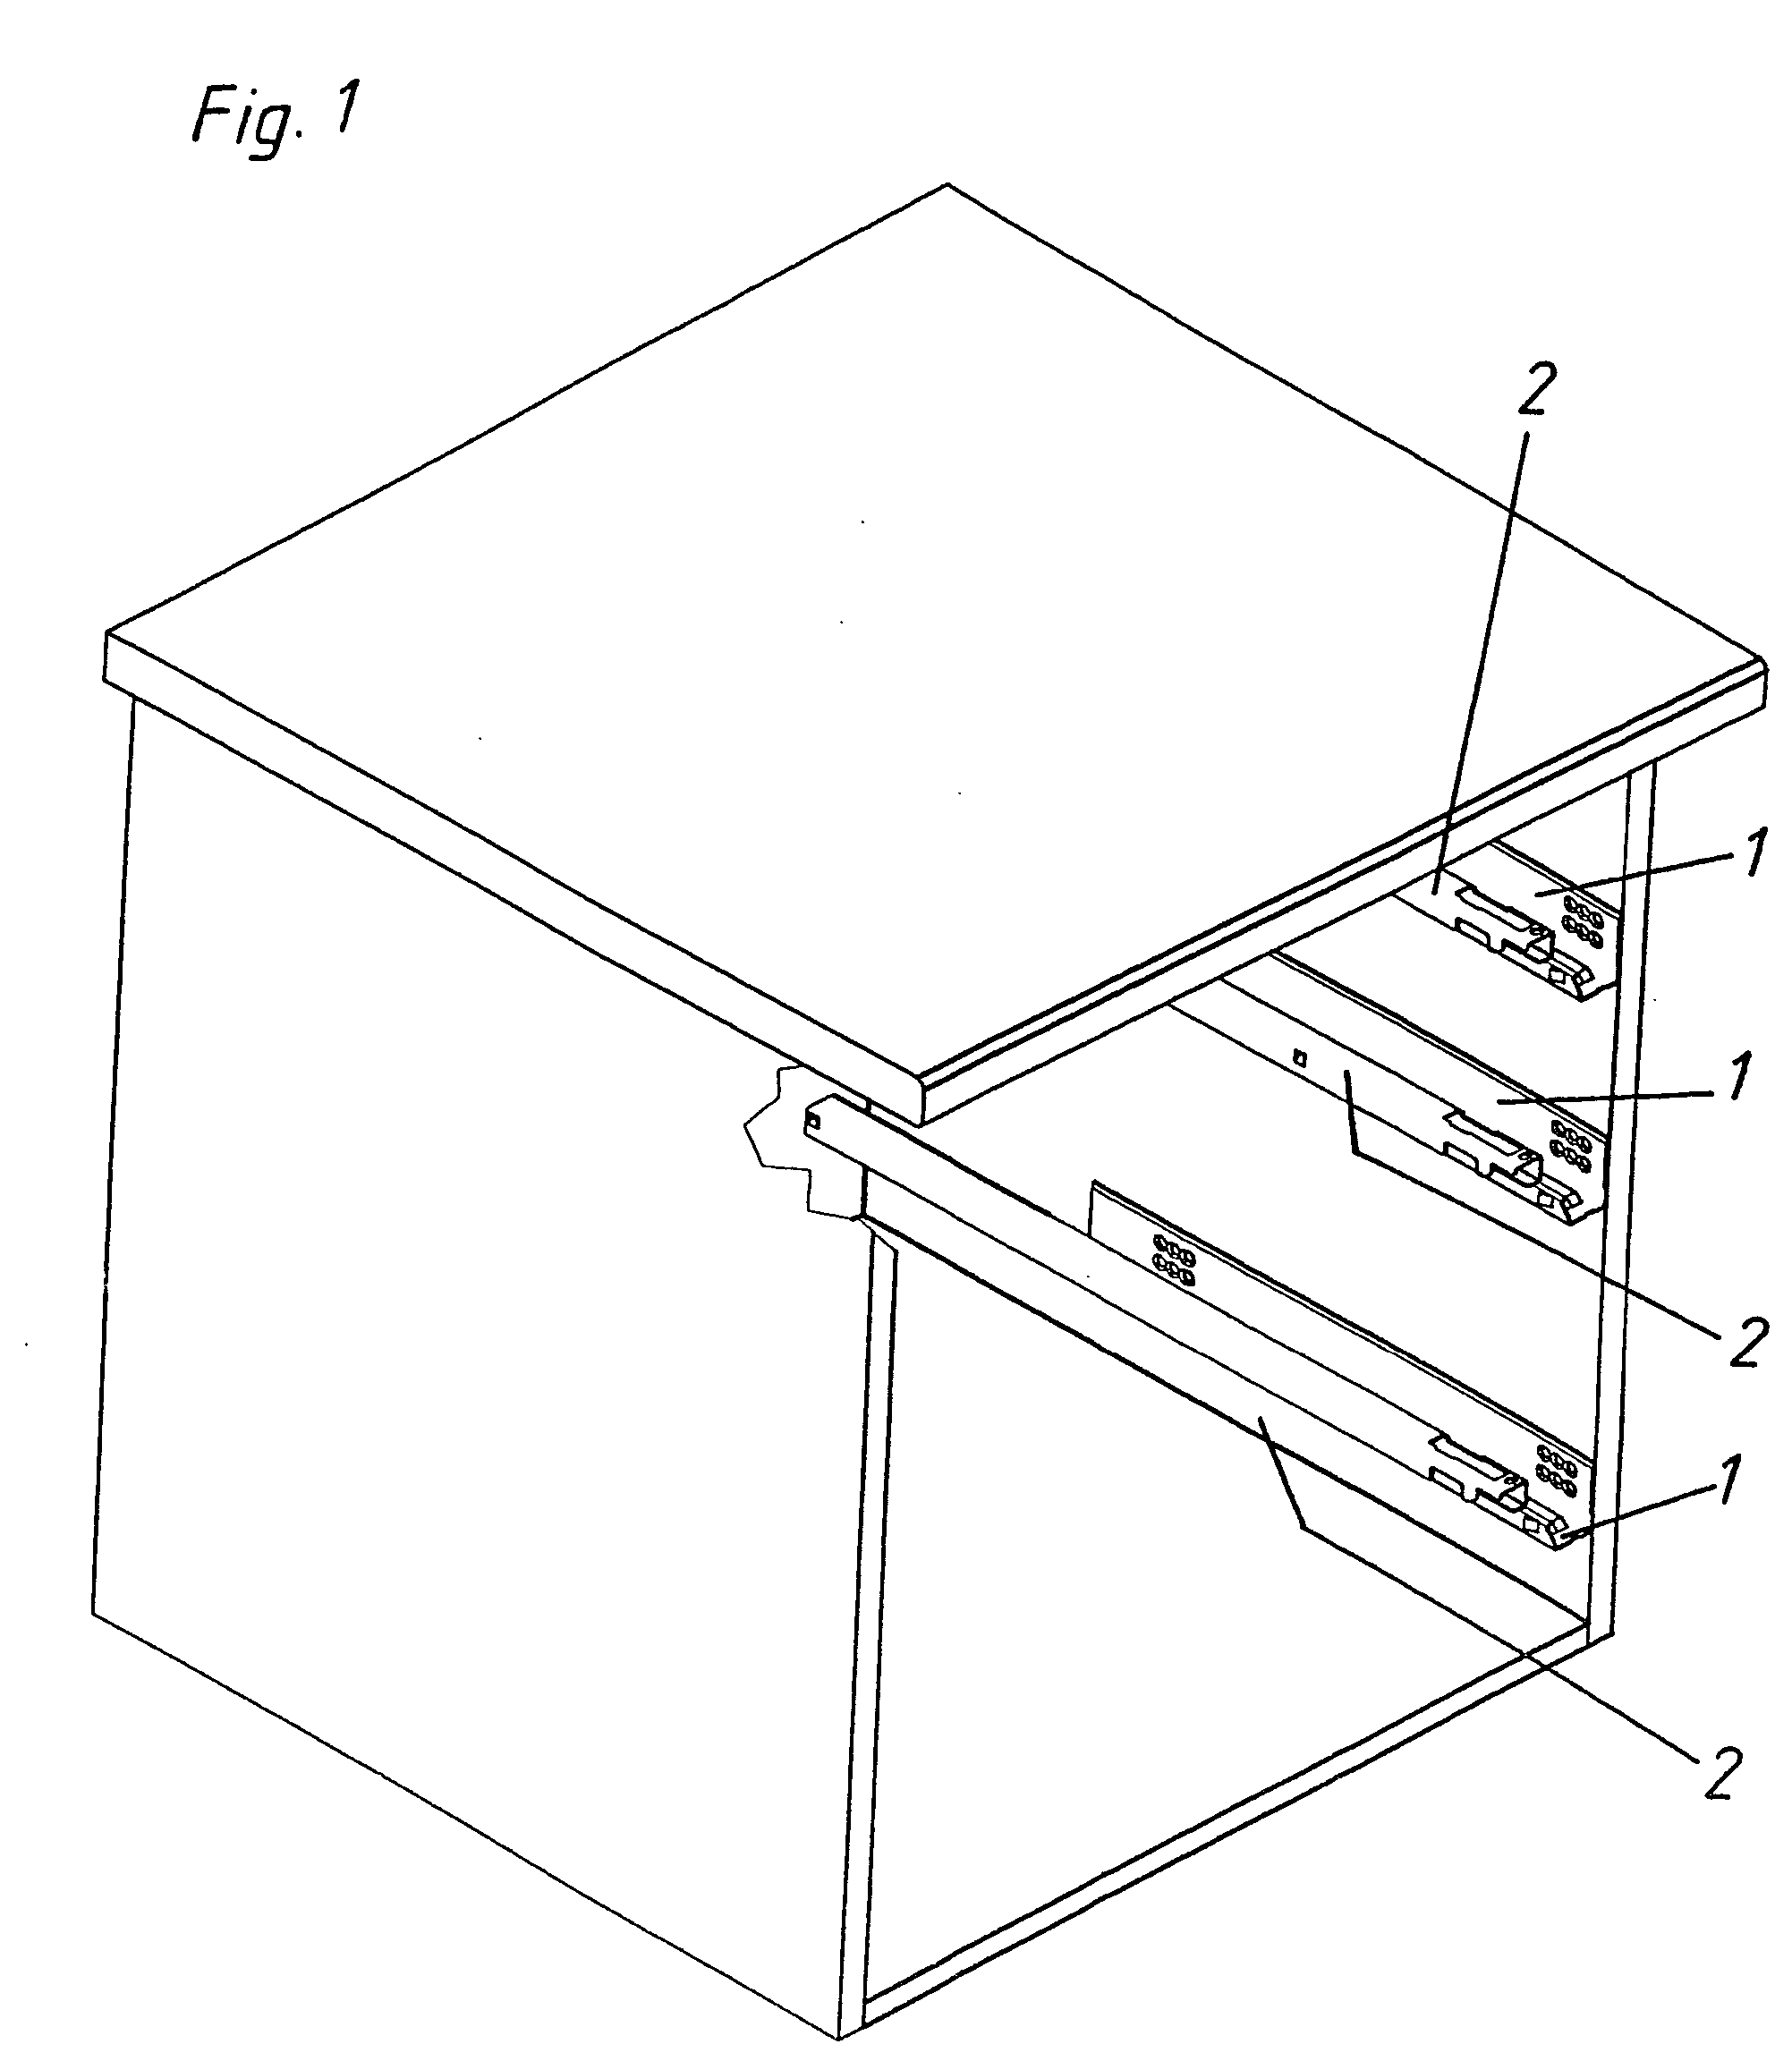 Pull out guide assembly for drawers